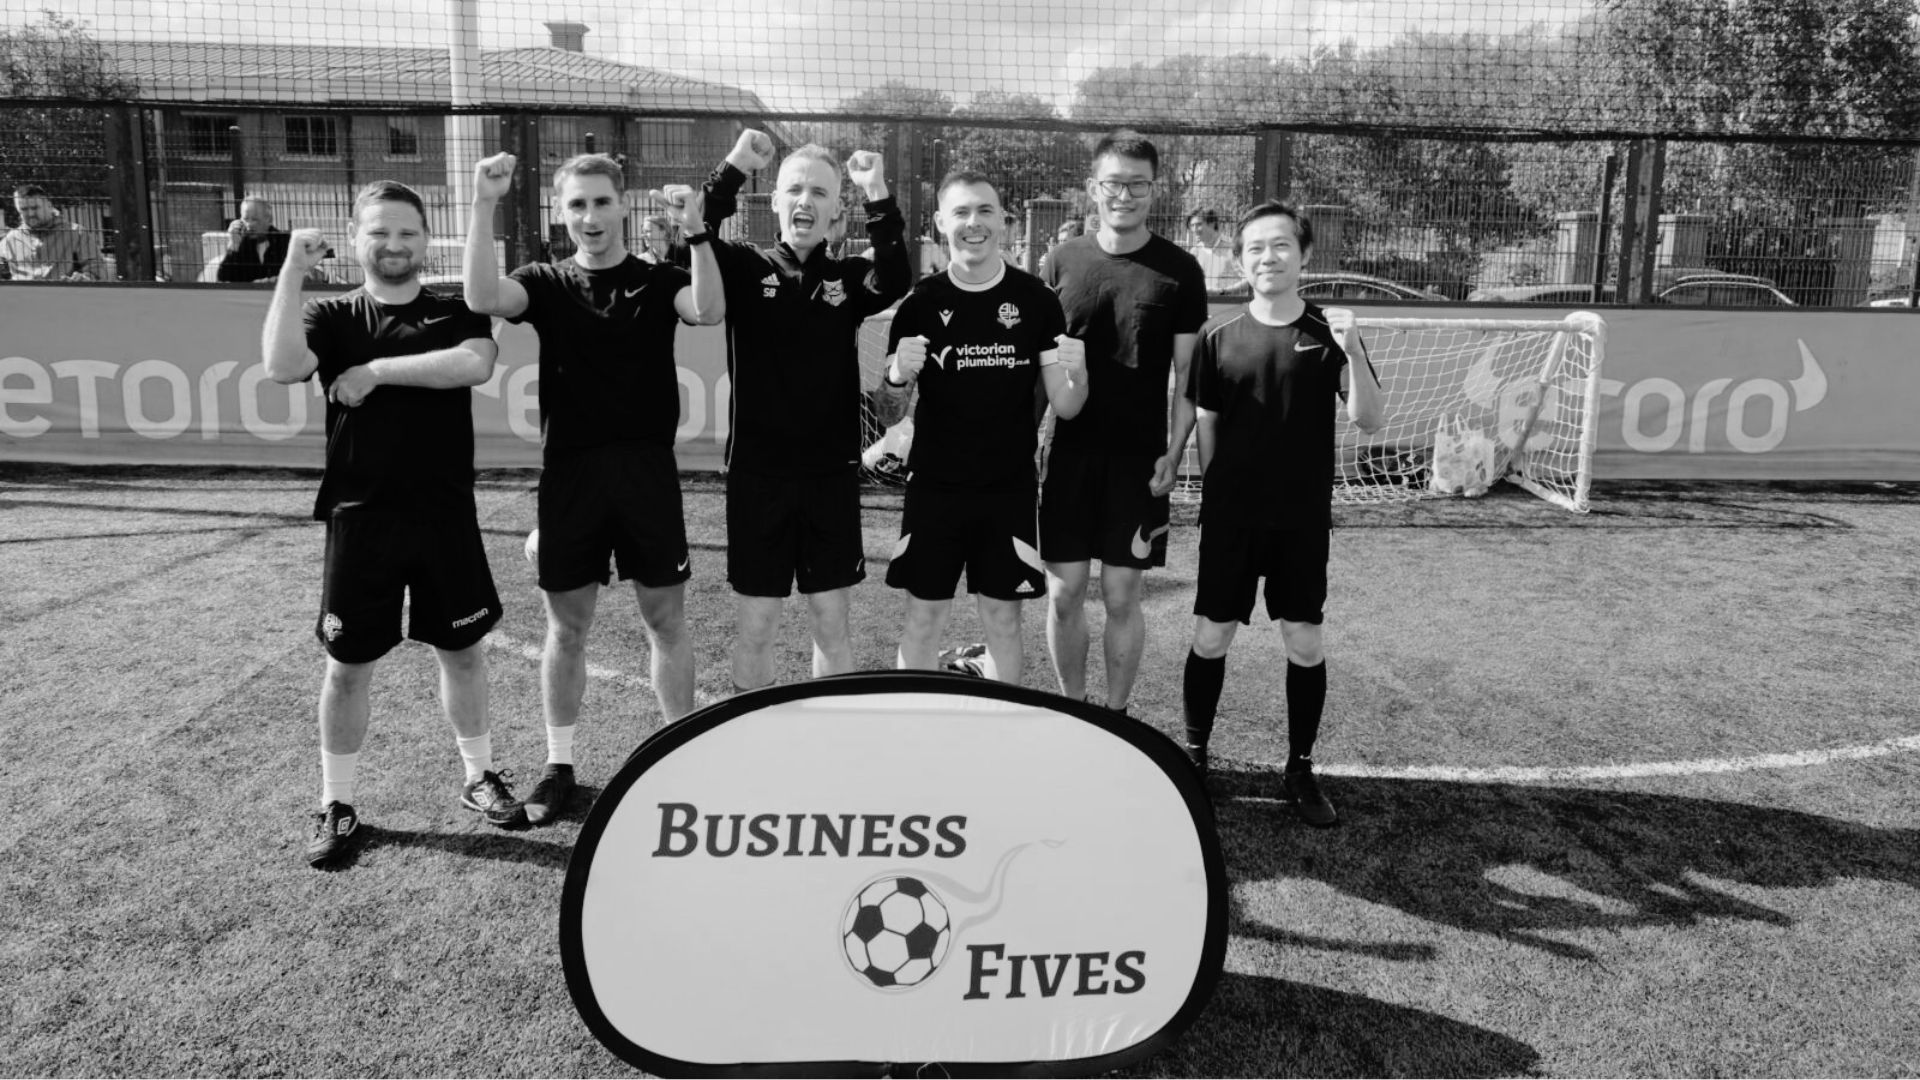 ITS Secures Victory and Raises £440 for Mind in Business Fives Tournament